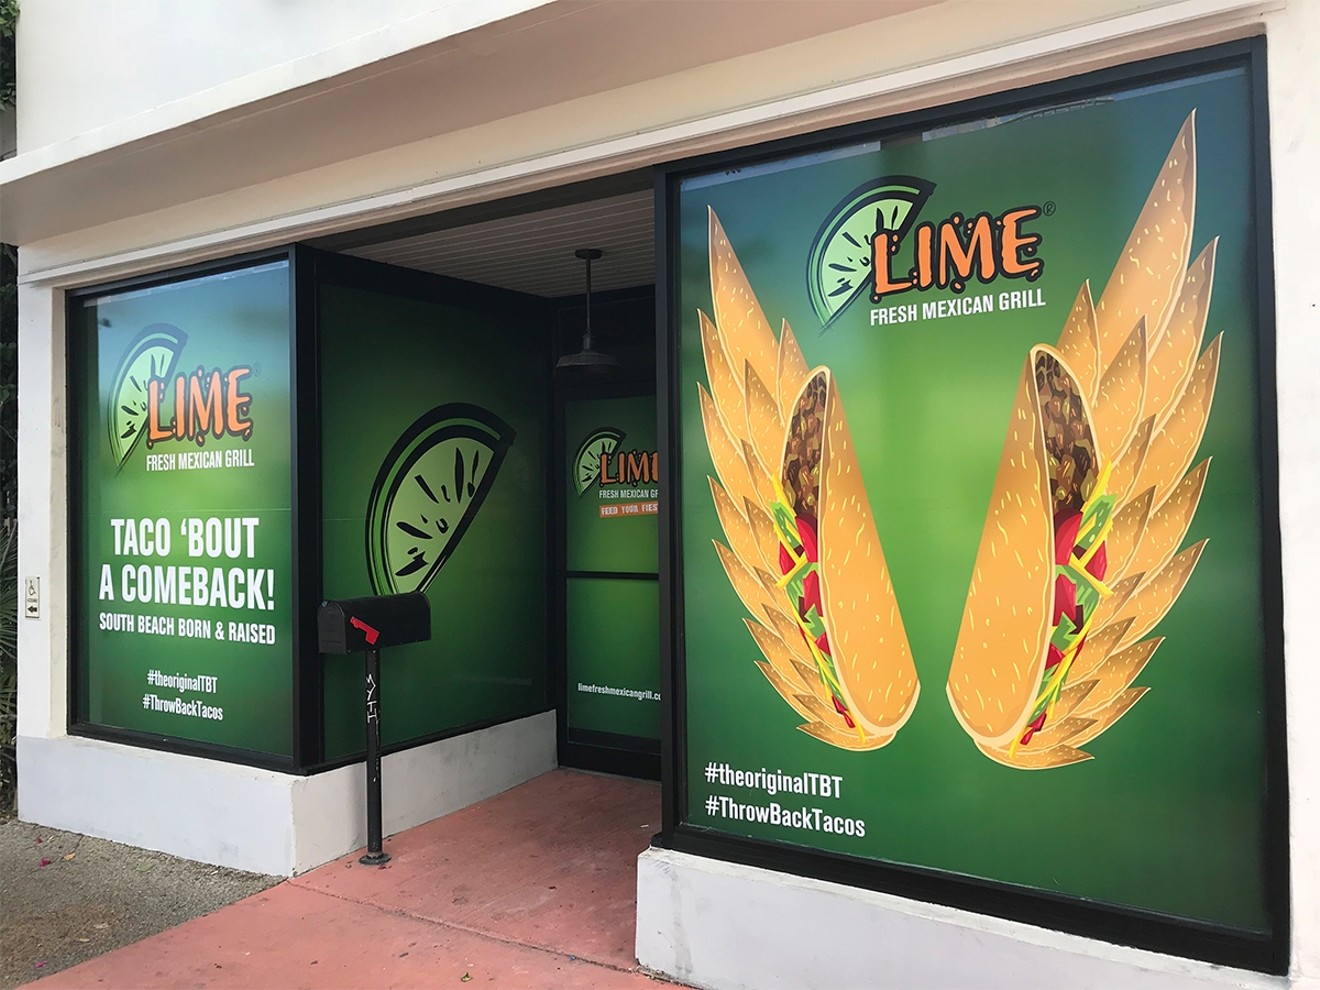 Lime returns to its original home in January.